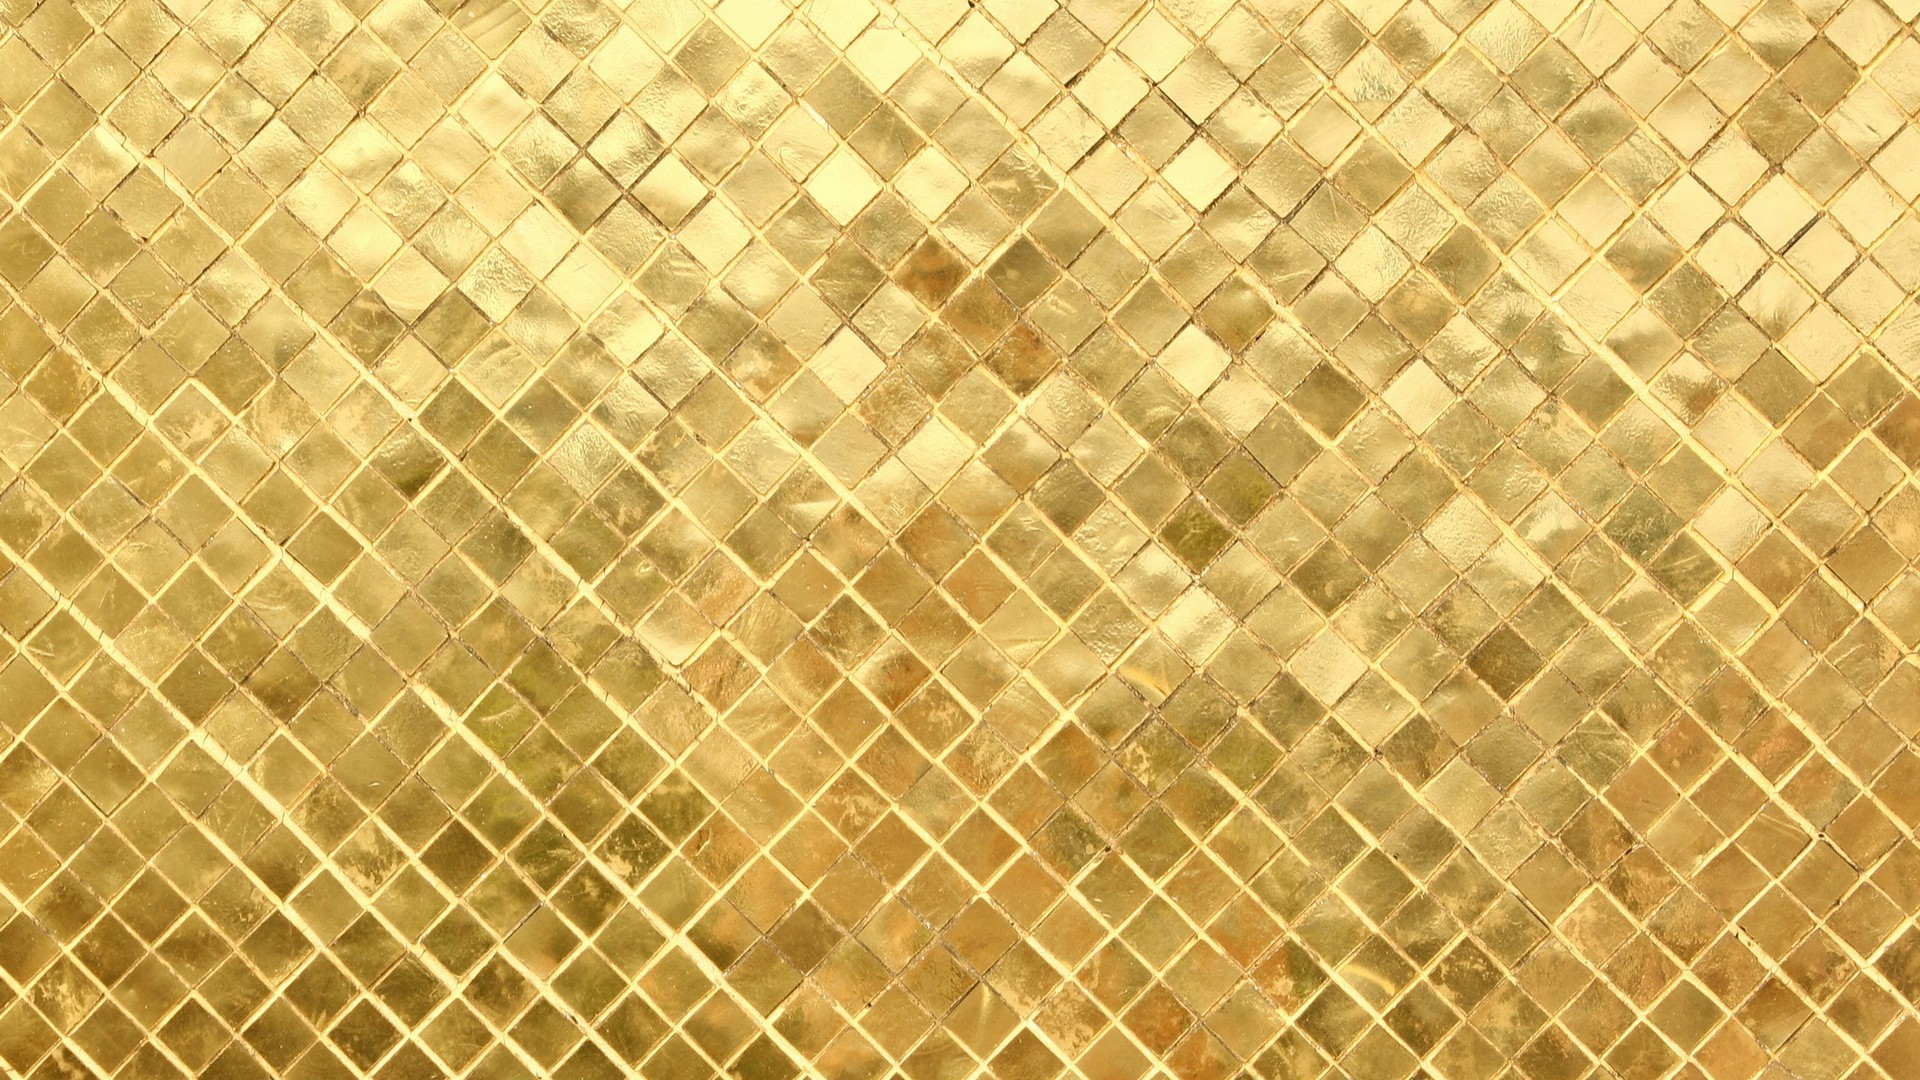 Gold tiles wallpapers and images - wallpapers, pictures ...